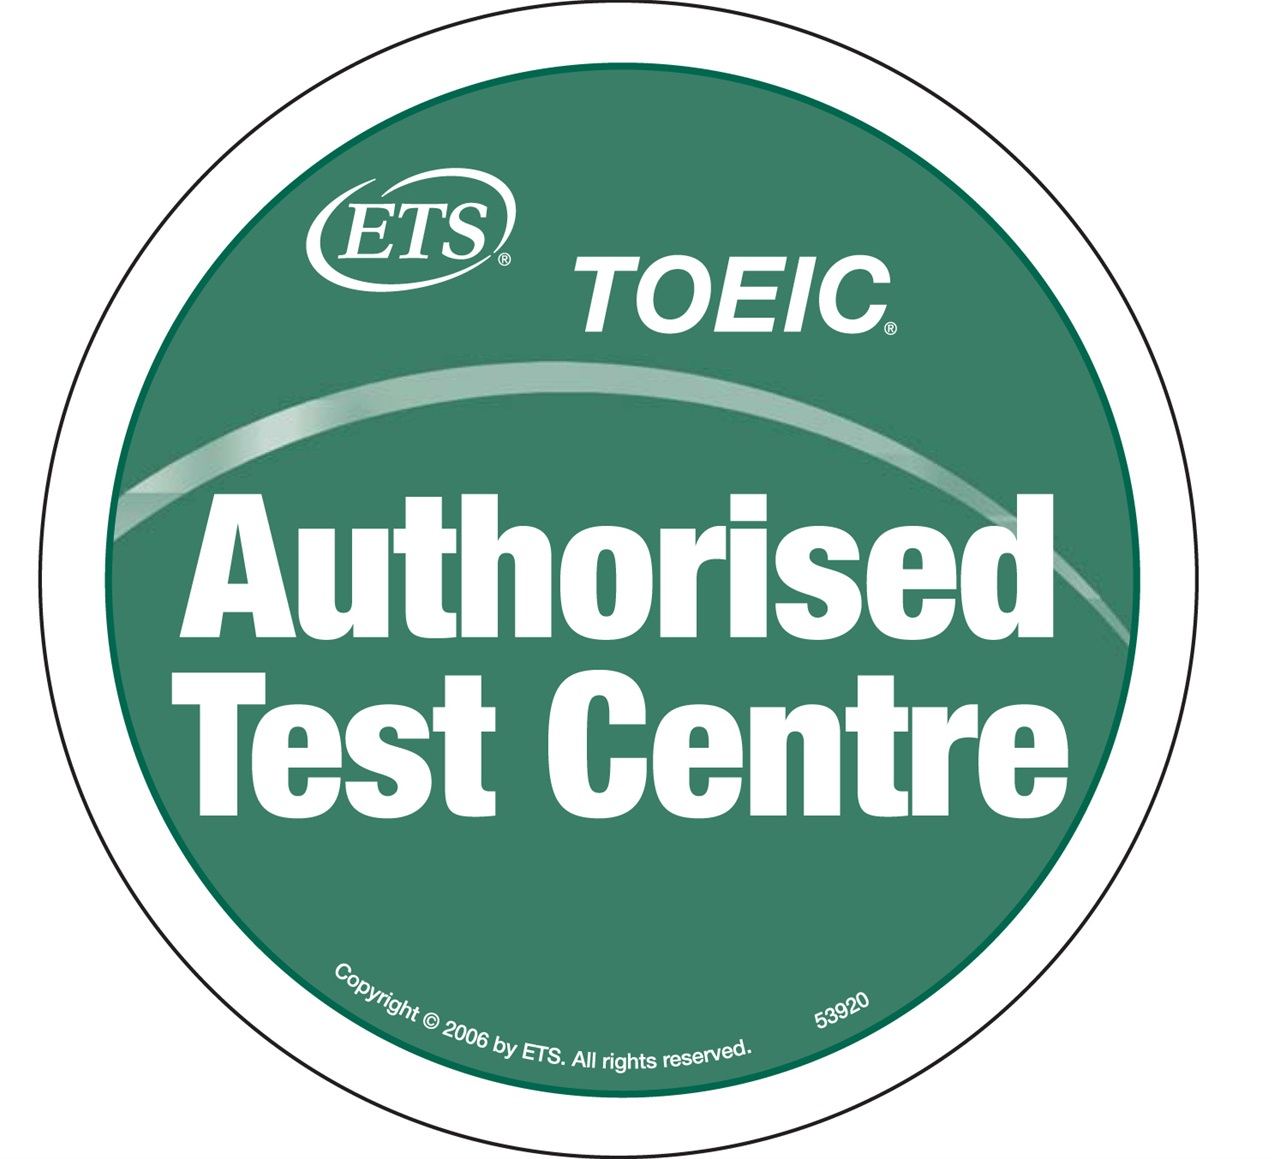 TOEIC test on this date is cancelled